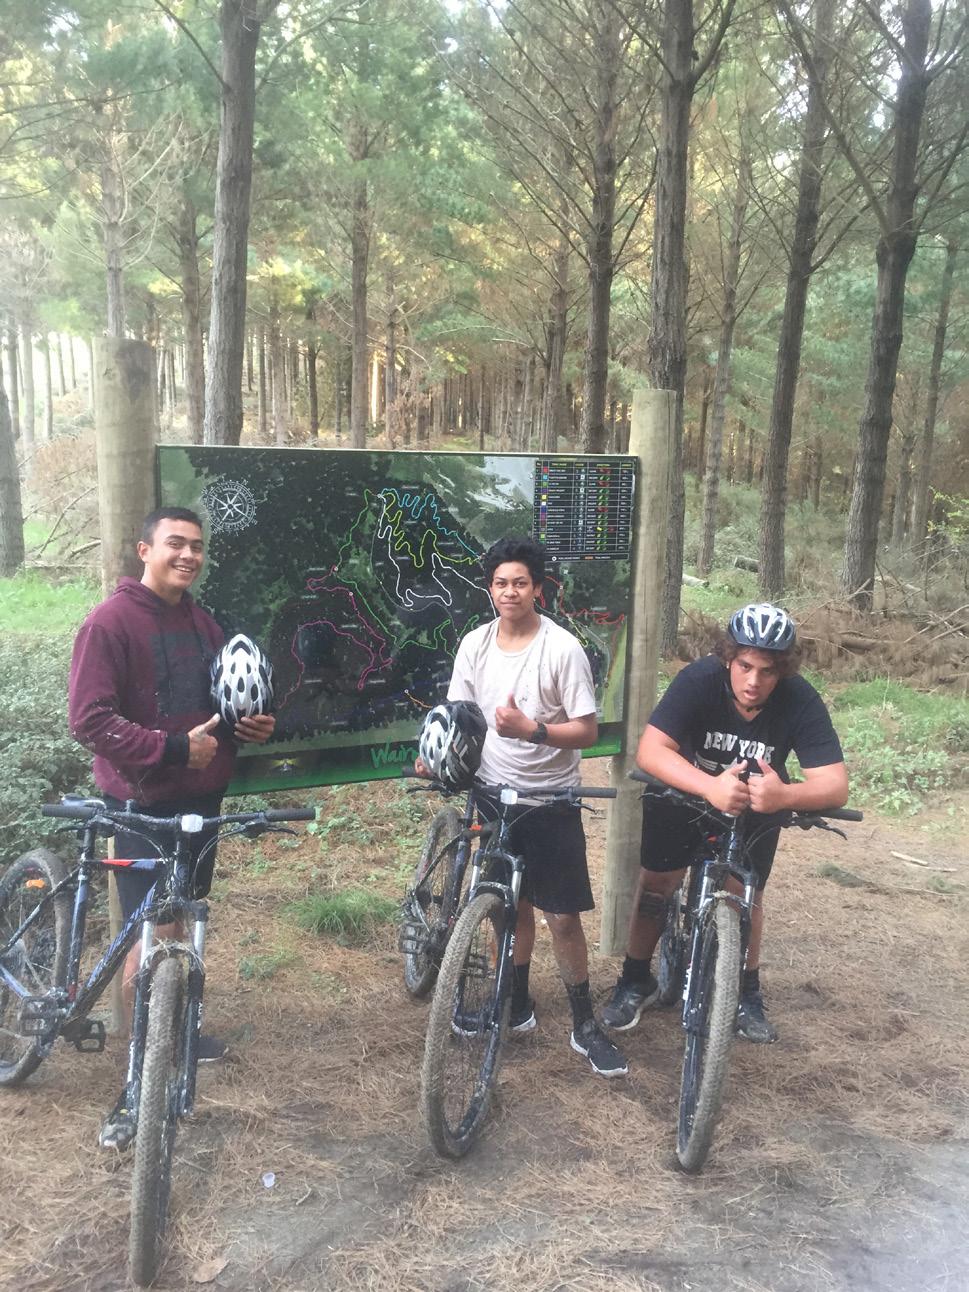 Special thanks must go to Adventure Wairoa for the lending of equipment, all students really appreciate this support and thoroughly enjoy their time and experiences spent at the mountain bike park